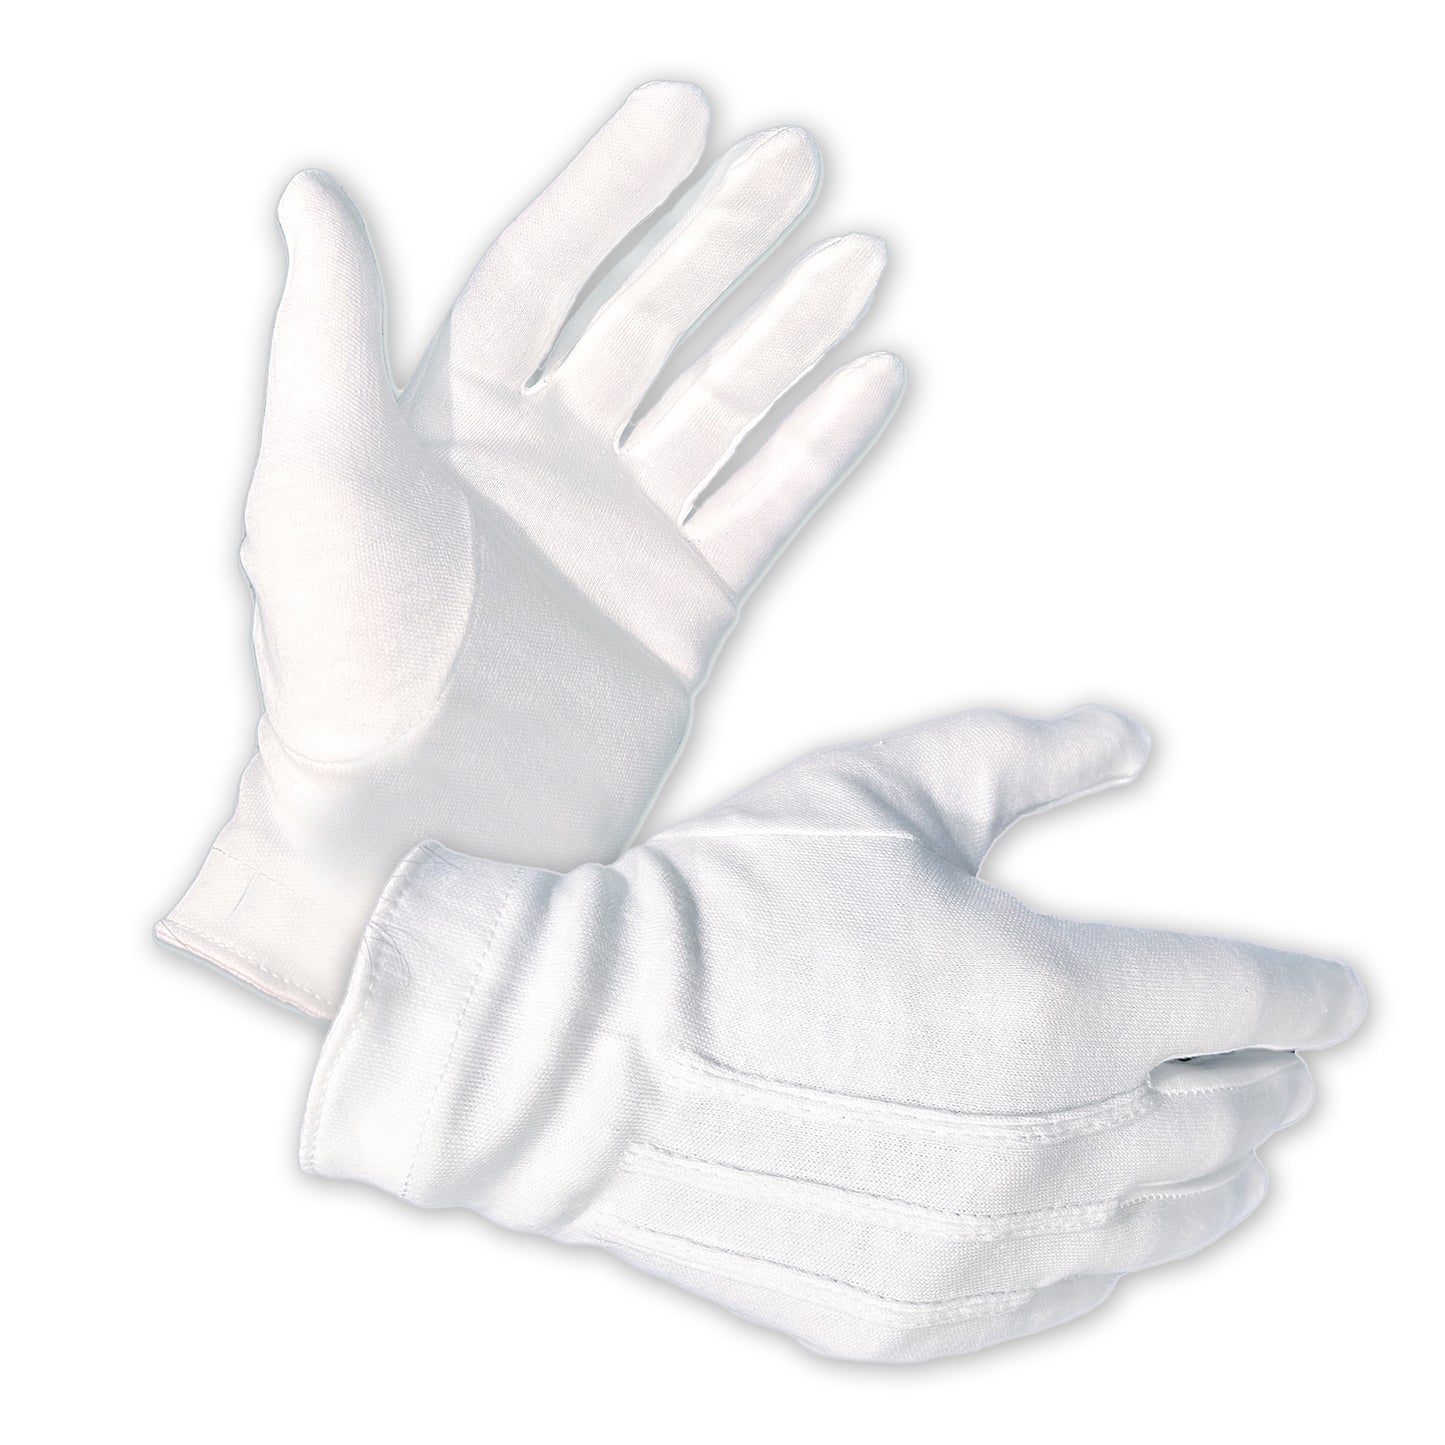 1 Pairs (2 Gloves) Size Large - Gloves Legend 100% White Cotton Marching Parade Formal Dress Gloves